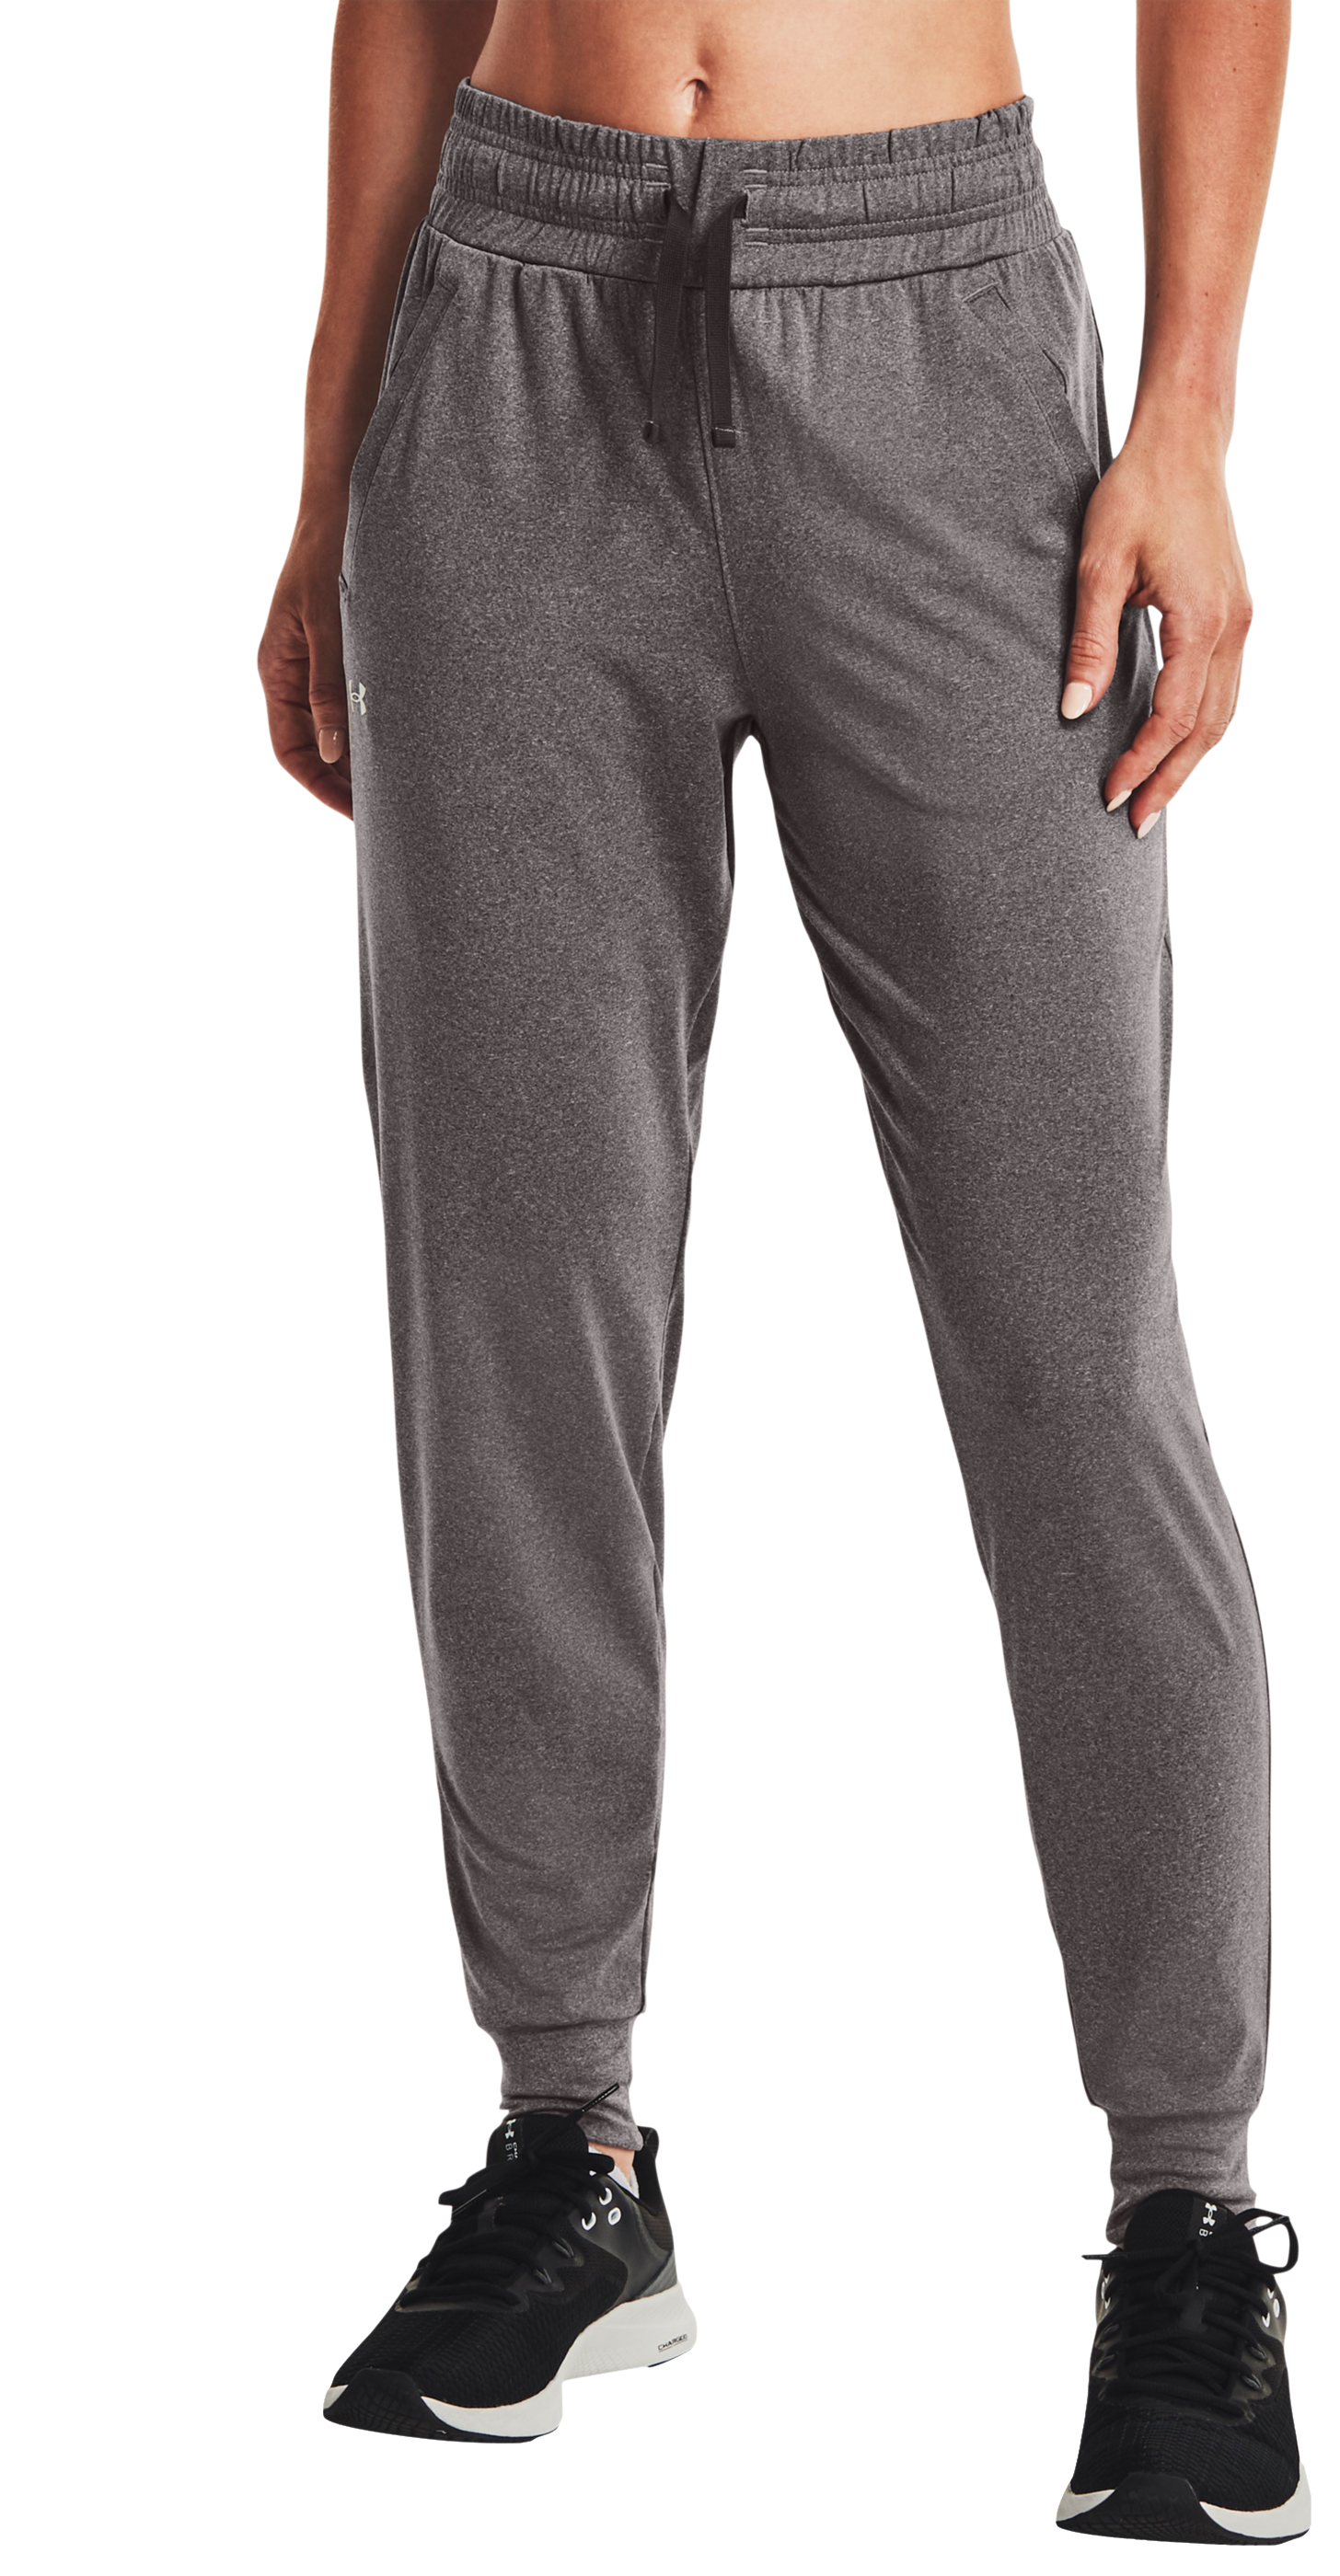 Under Armour HeatGear Armour Pants for Ladies - Charcoal Light Heather/White - XL - Short